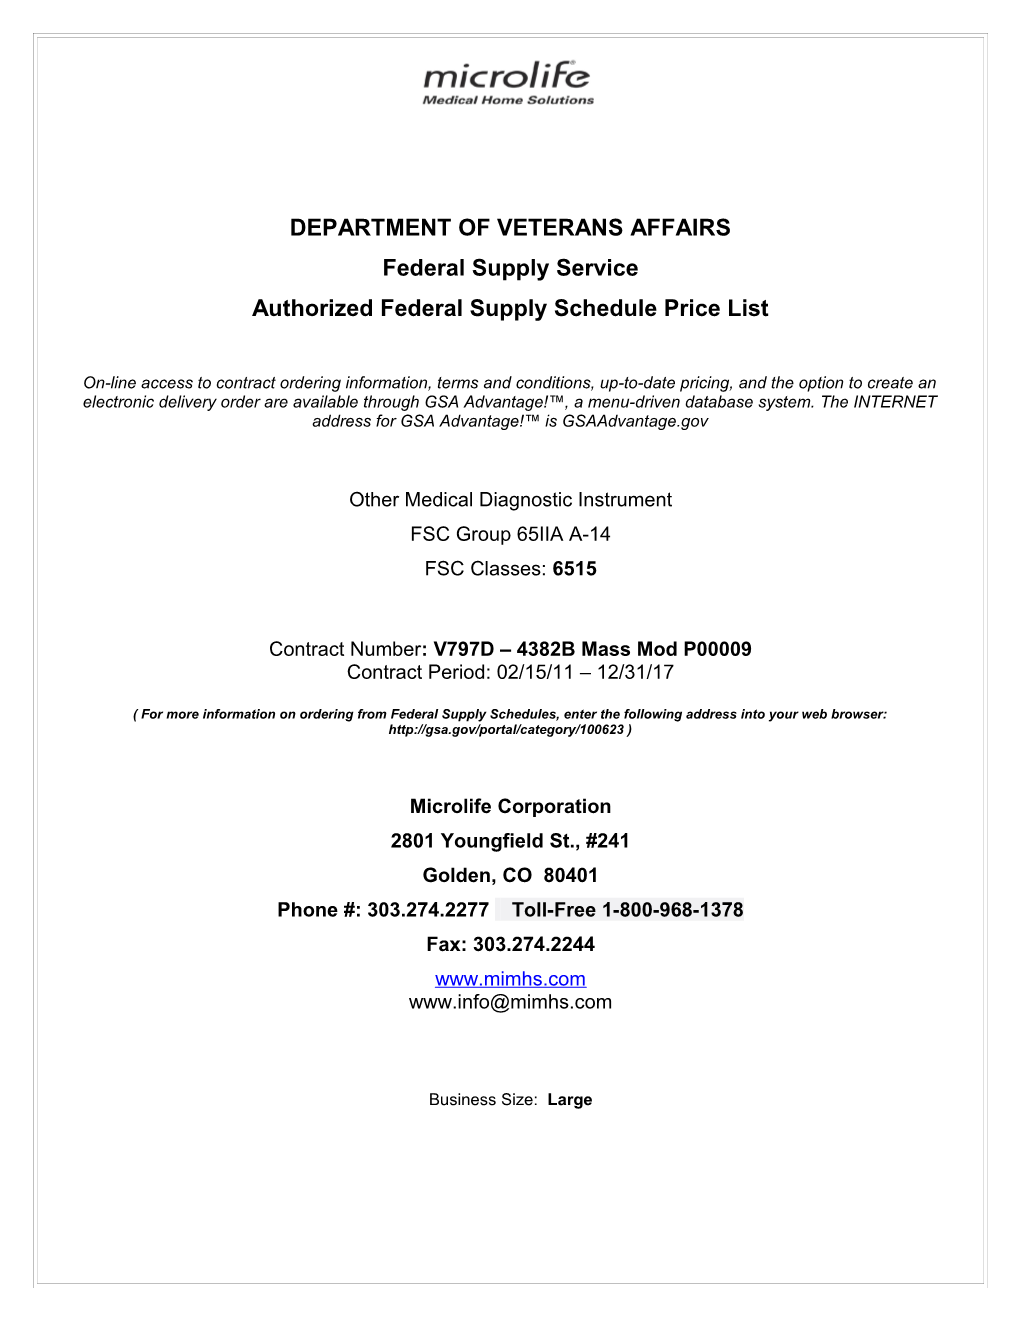 Authorized Federal Supply Schedule Price List s12